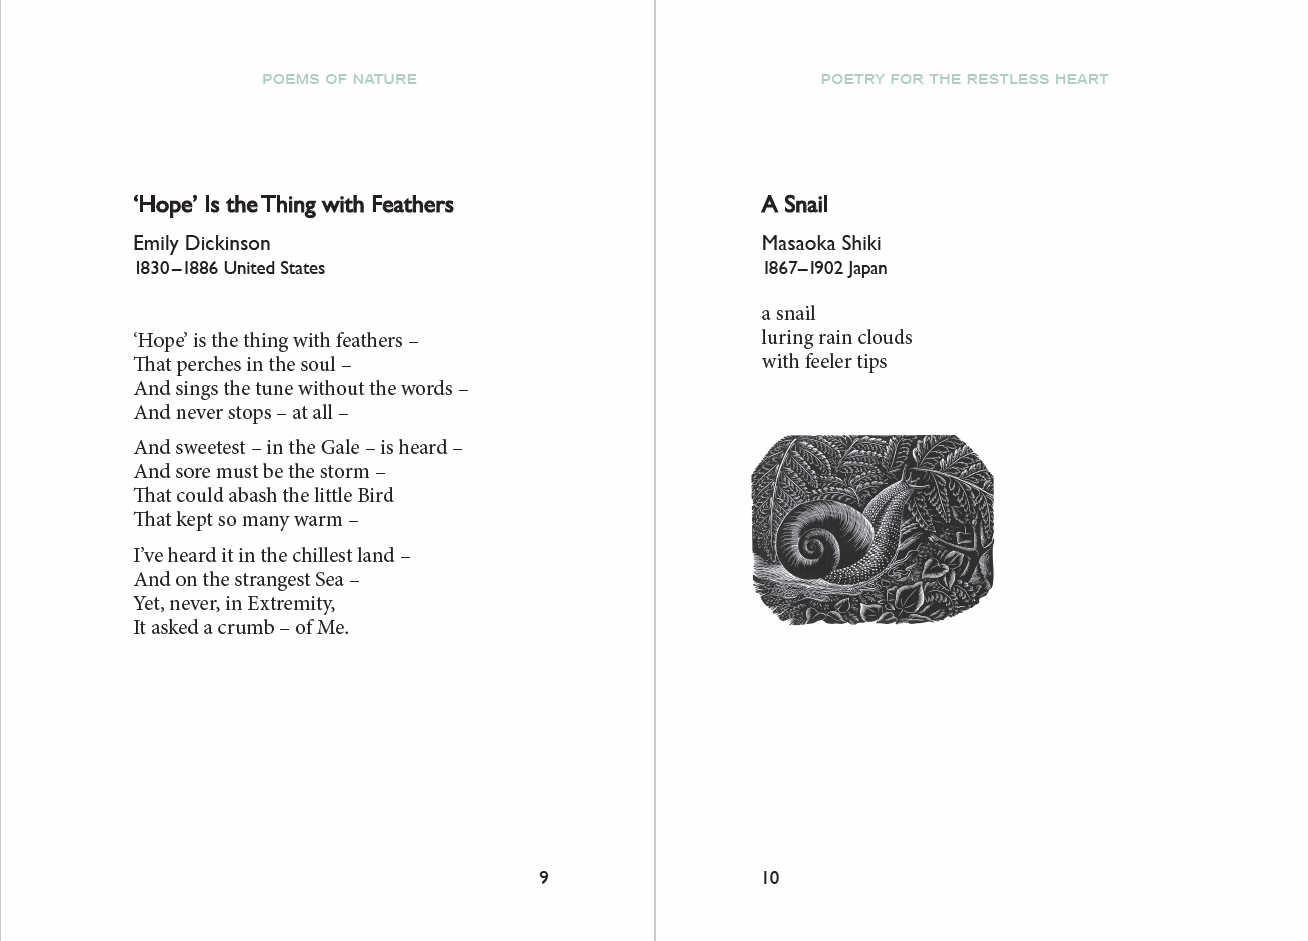 Poetry for The Restless Heart book spread. Pg 9-10 has text and Pg 10 has a woodcut print of a snail